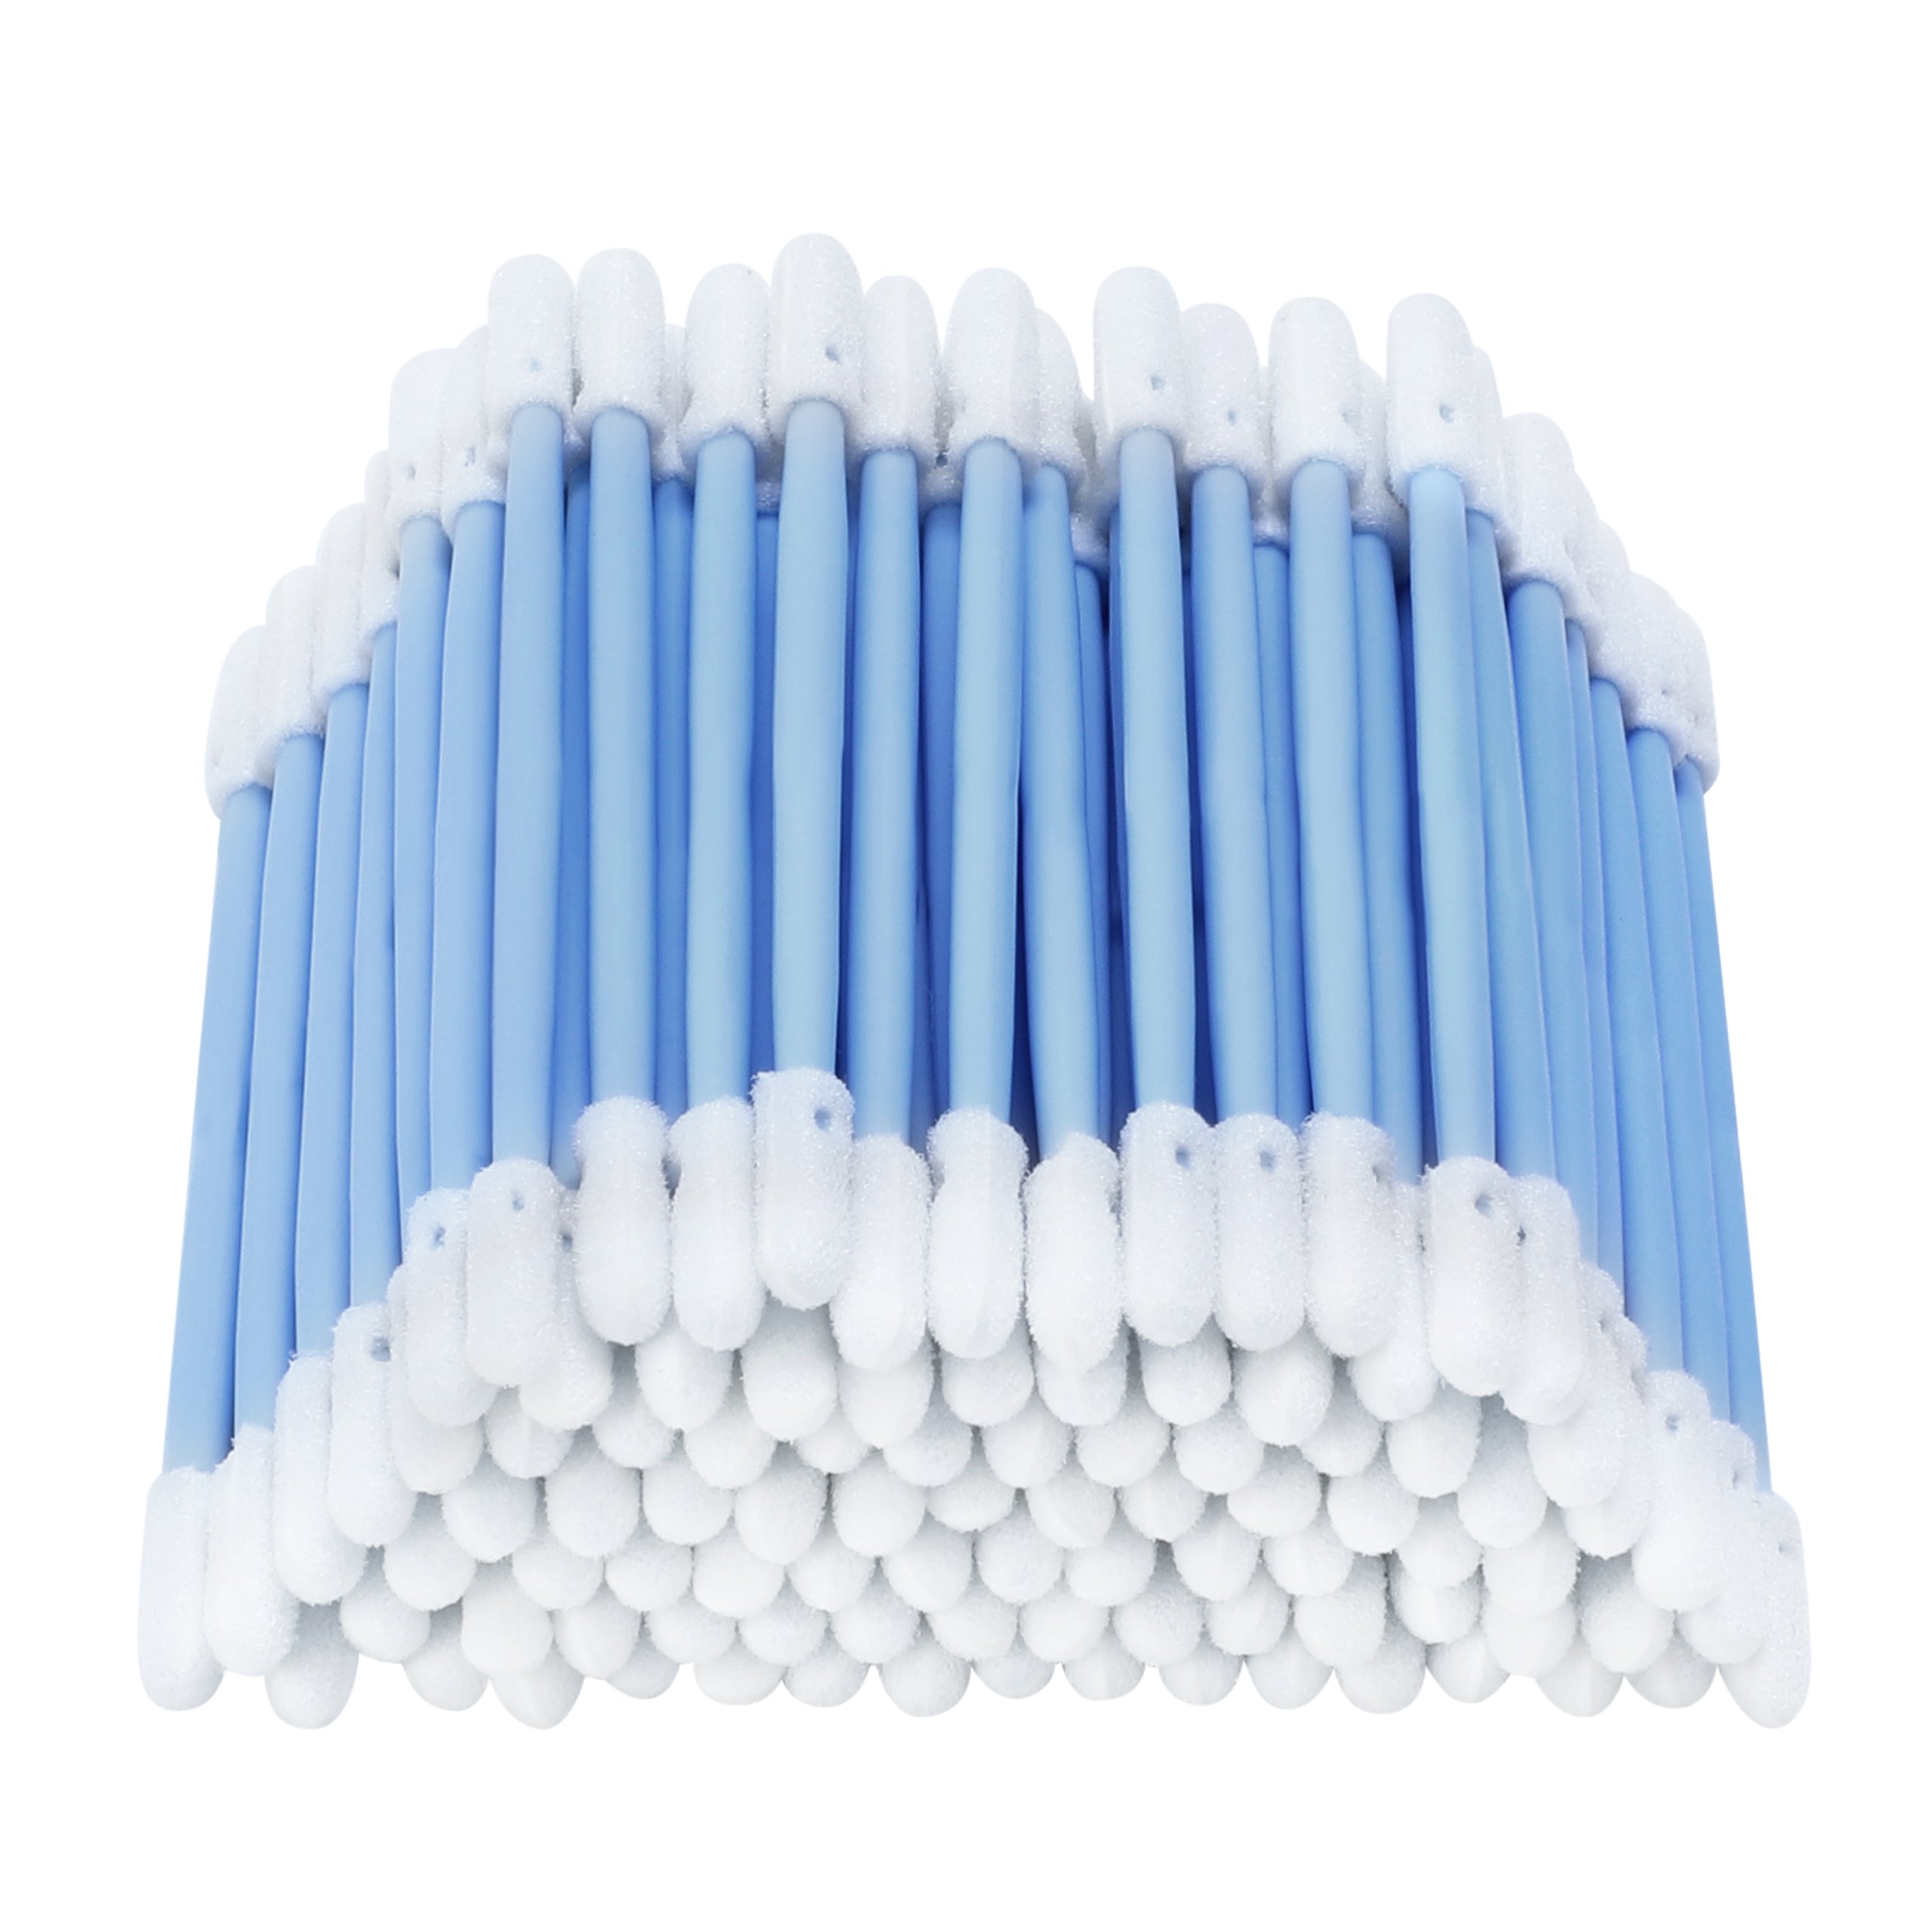 Lint-free 3" Double-Headed Q Tip Foam Swabs electronic Cleaning Sticks (1,000pcs, 3.2 mm Round Head, 76 mm Length)  for Cleaning Tiny Grooved Areas (AD7220)